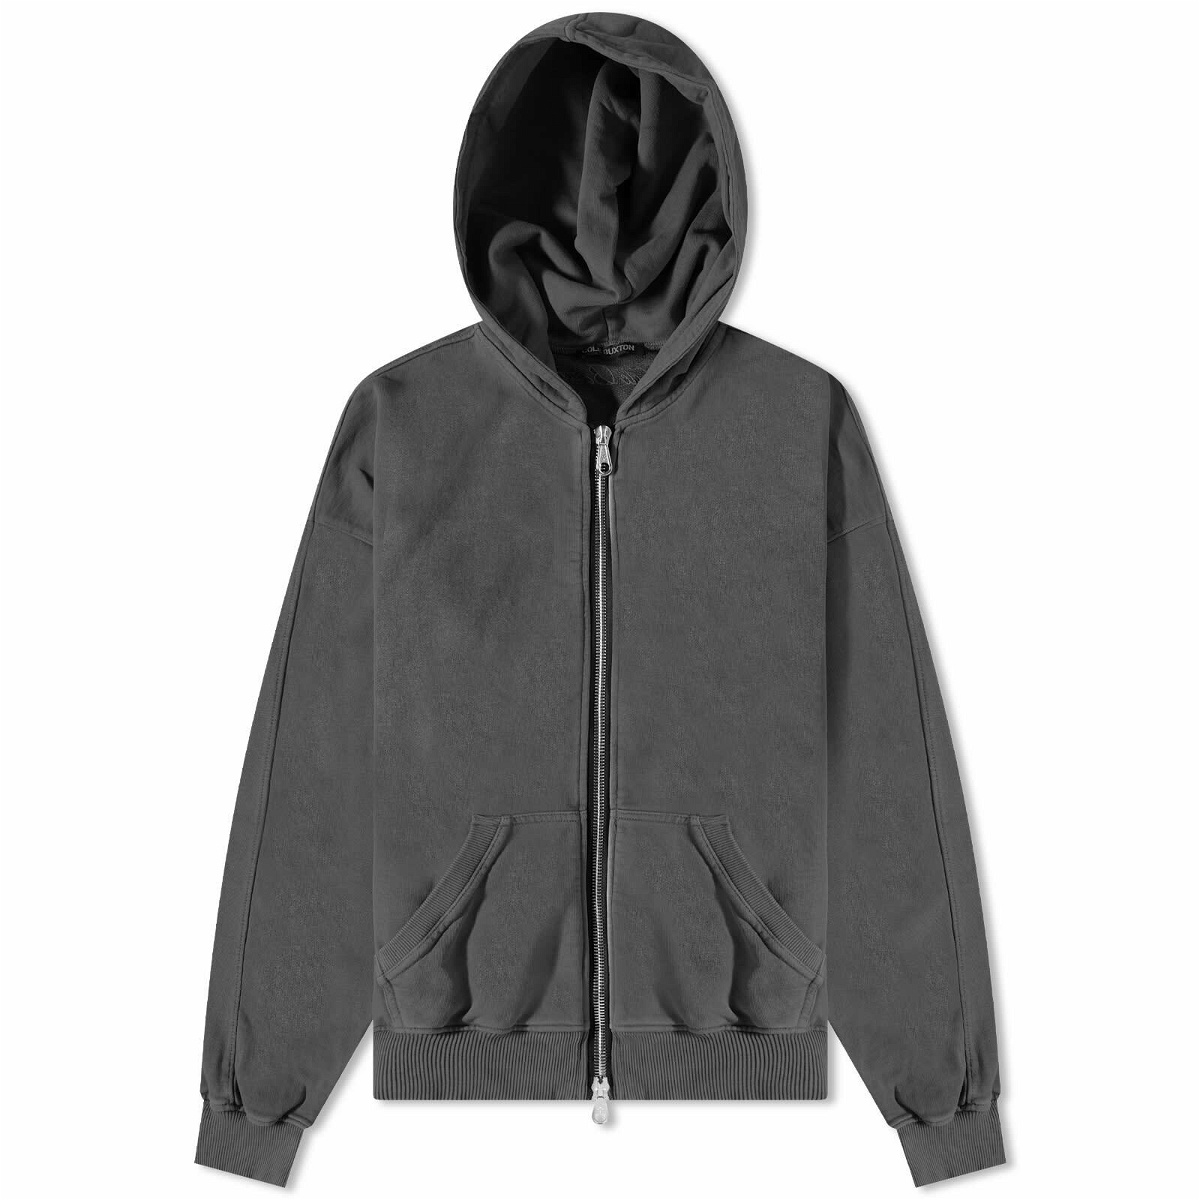 Cole Buxton Men's Warm Up Zip Hoody in Black Cole Buxton